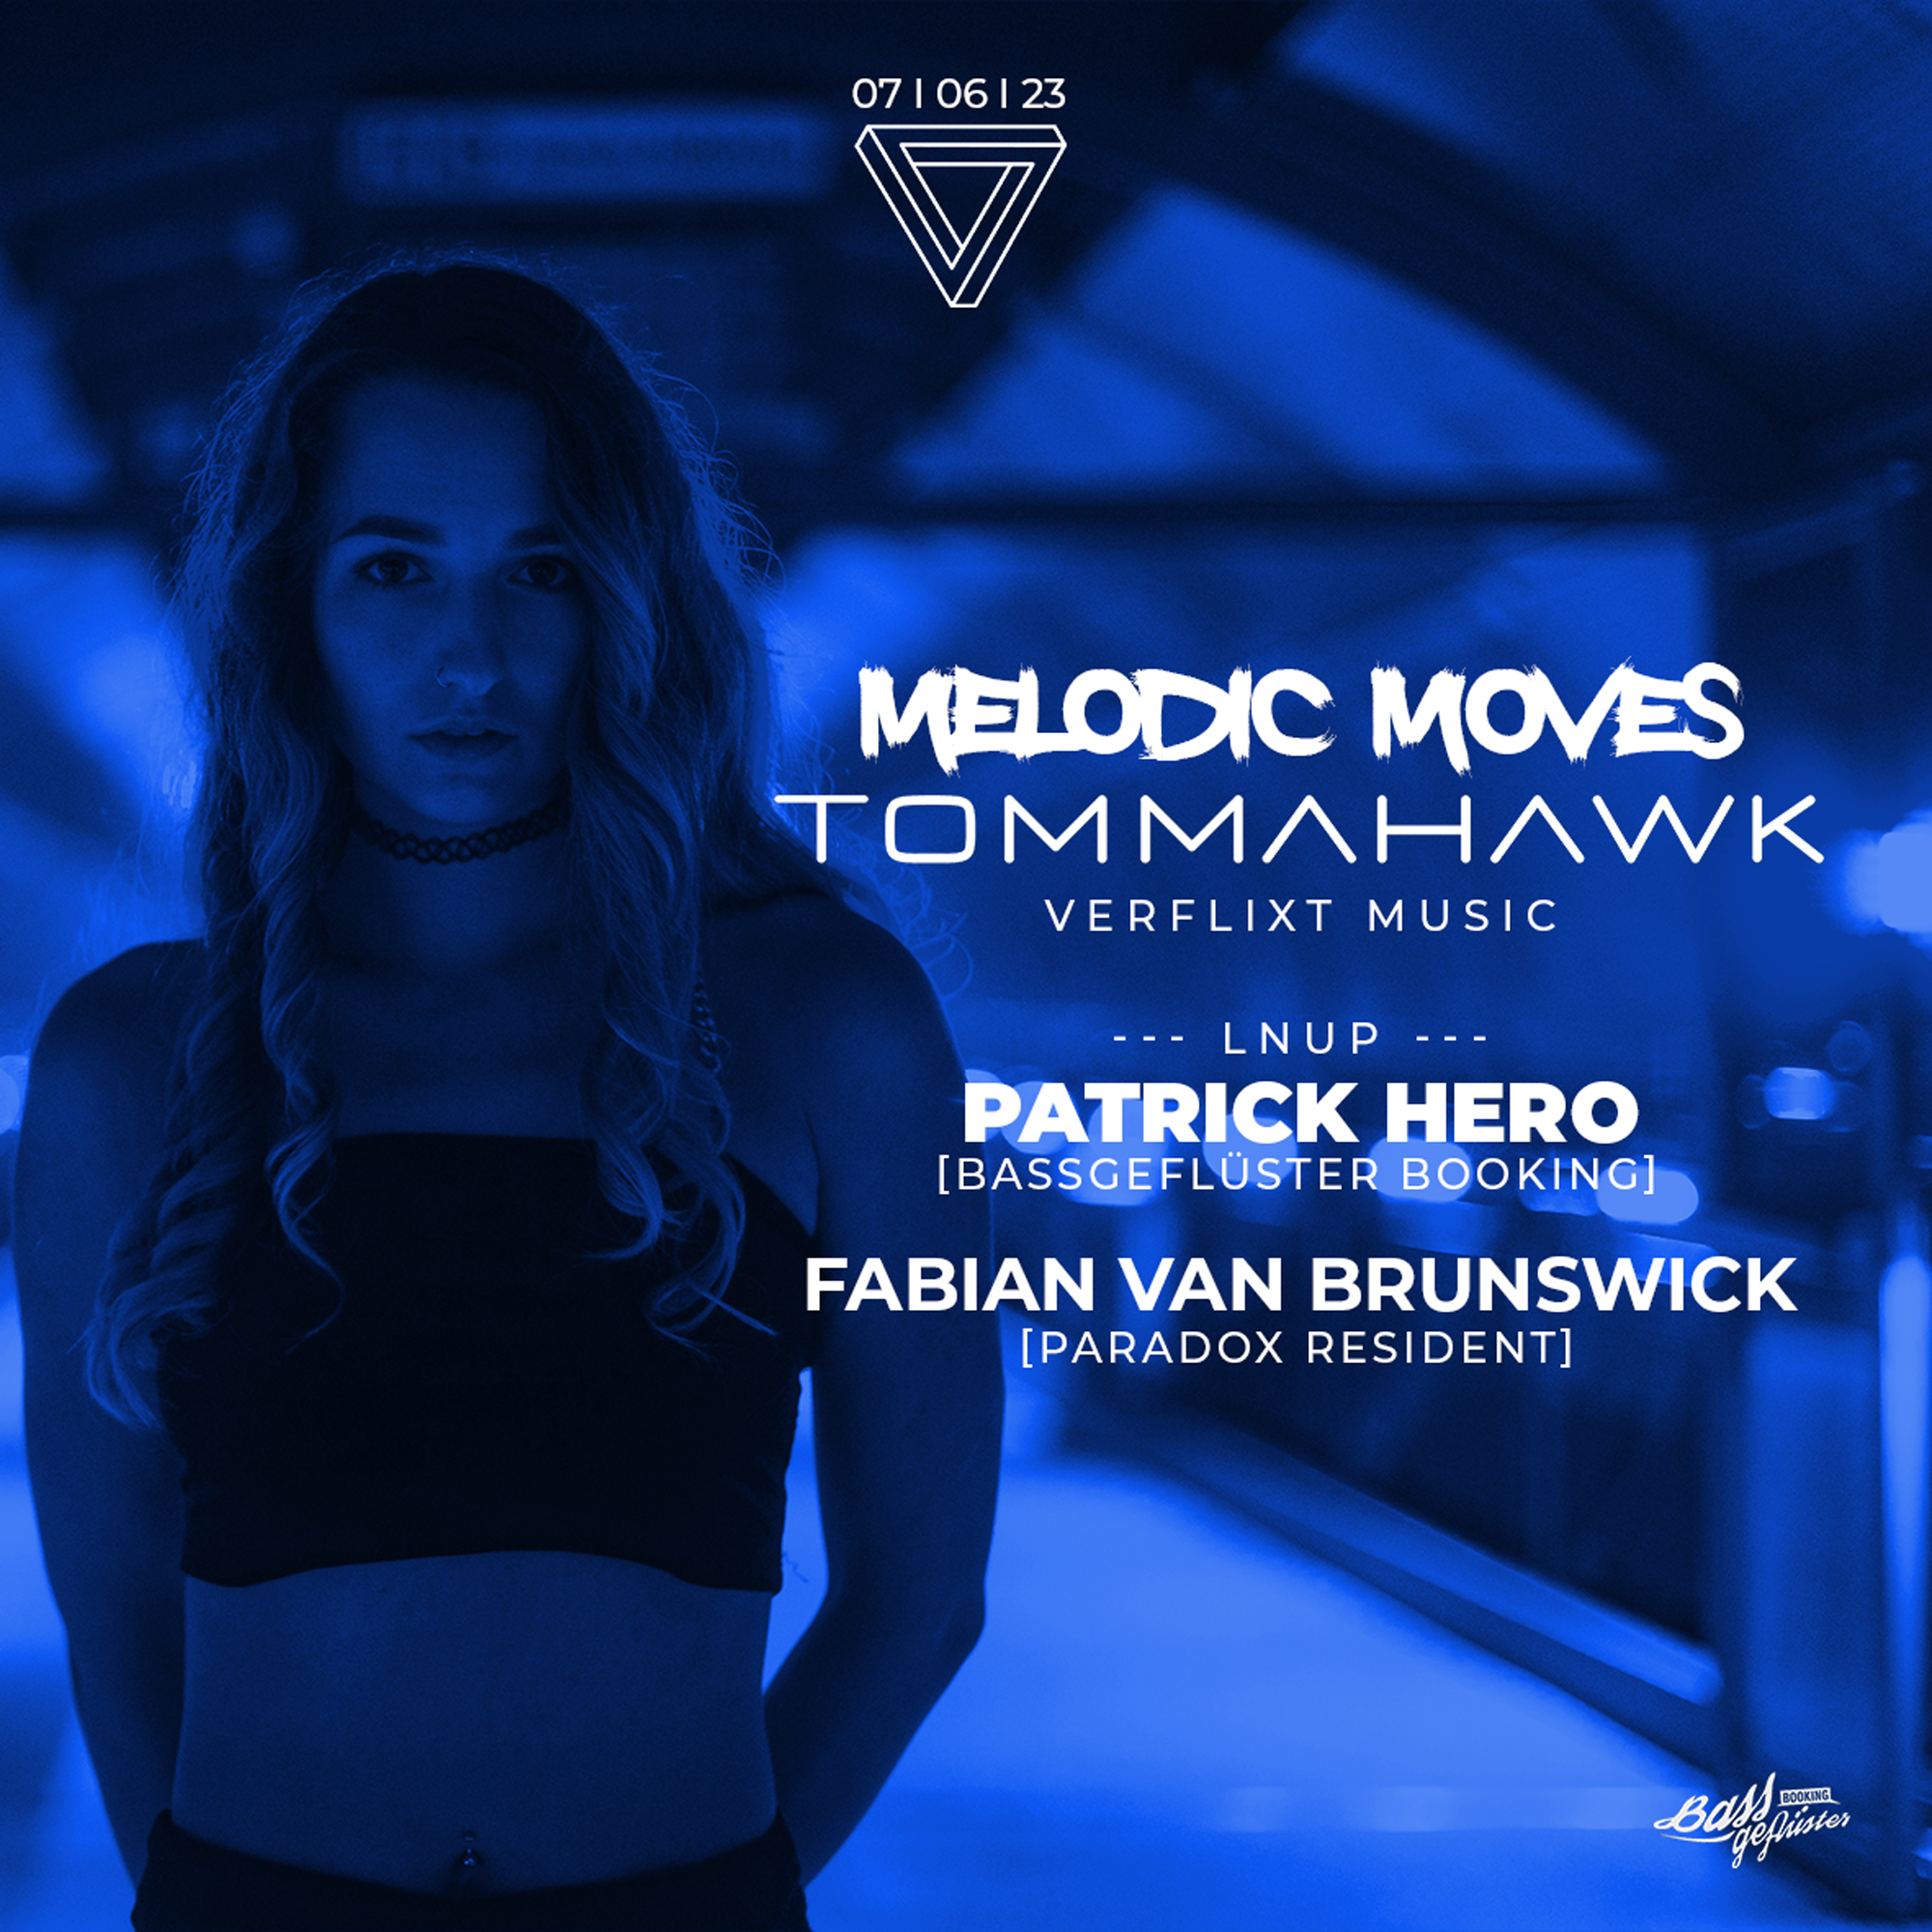 07.06 Melodic Moves: Tommahawk